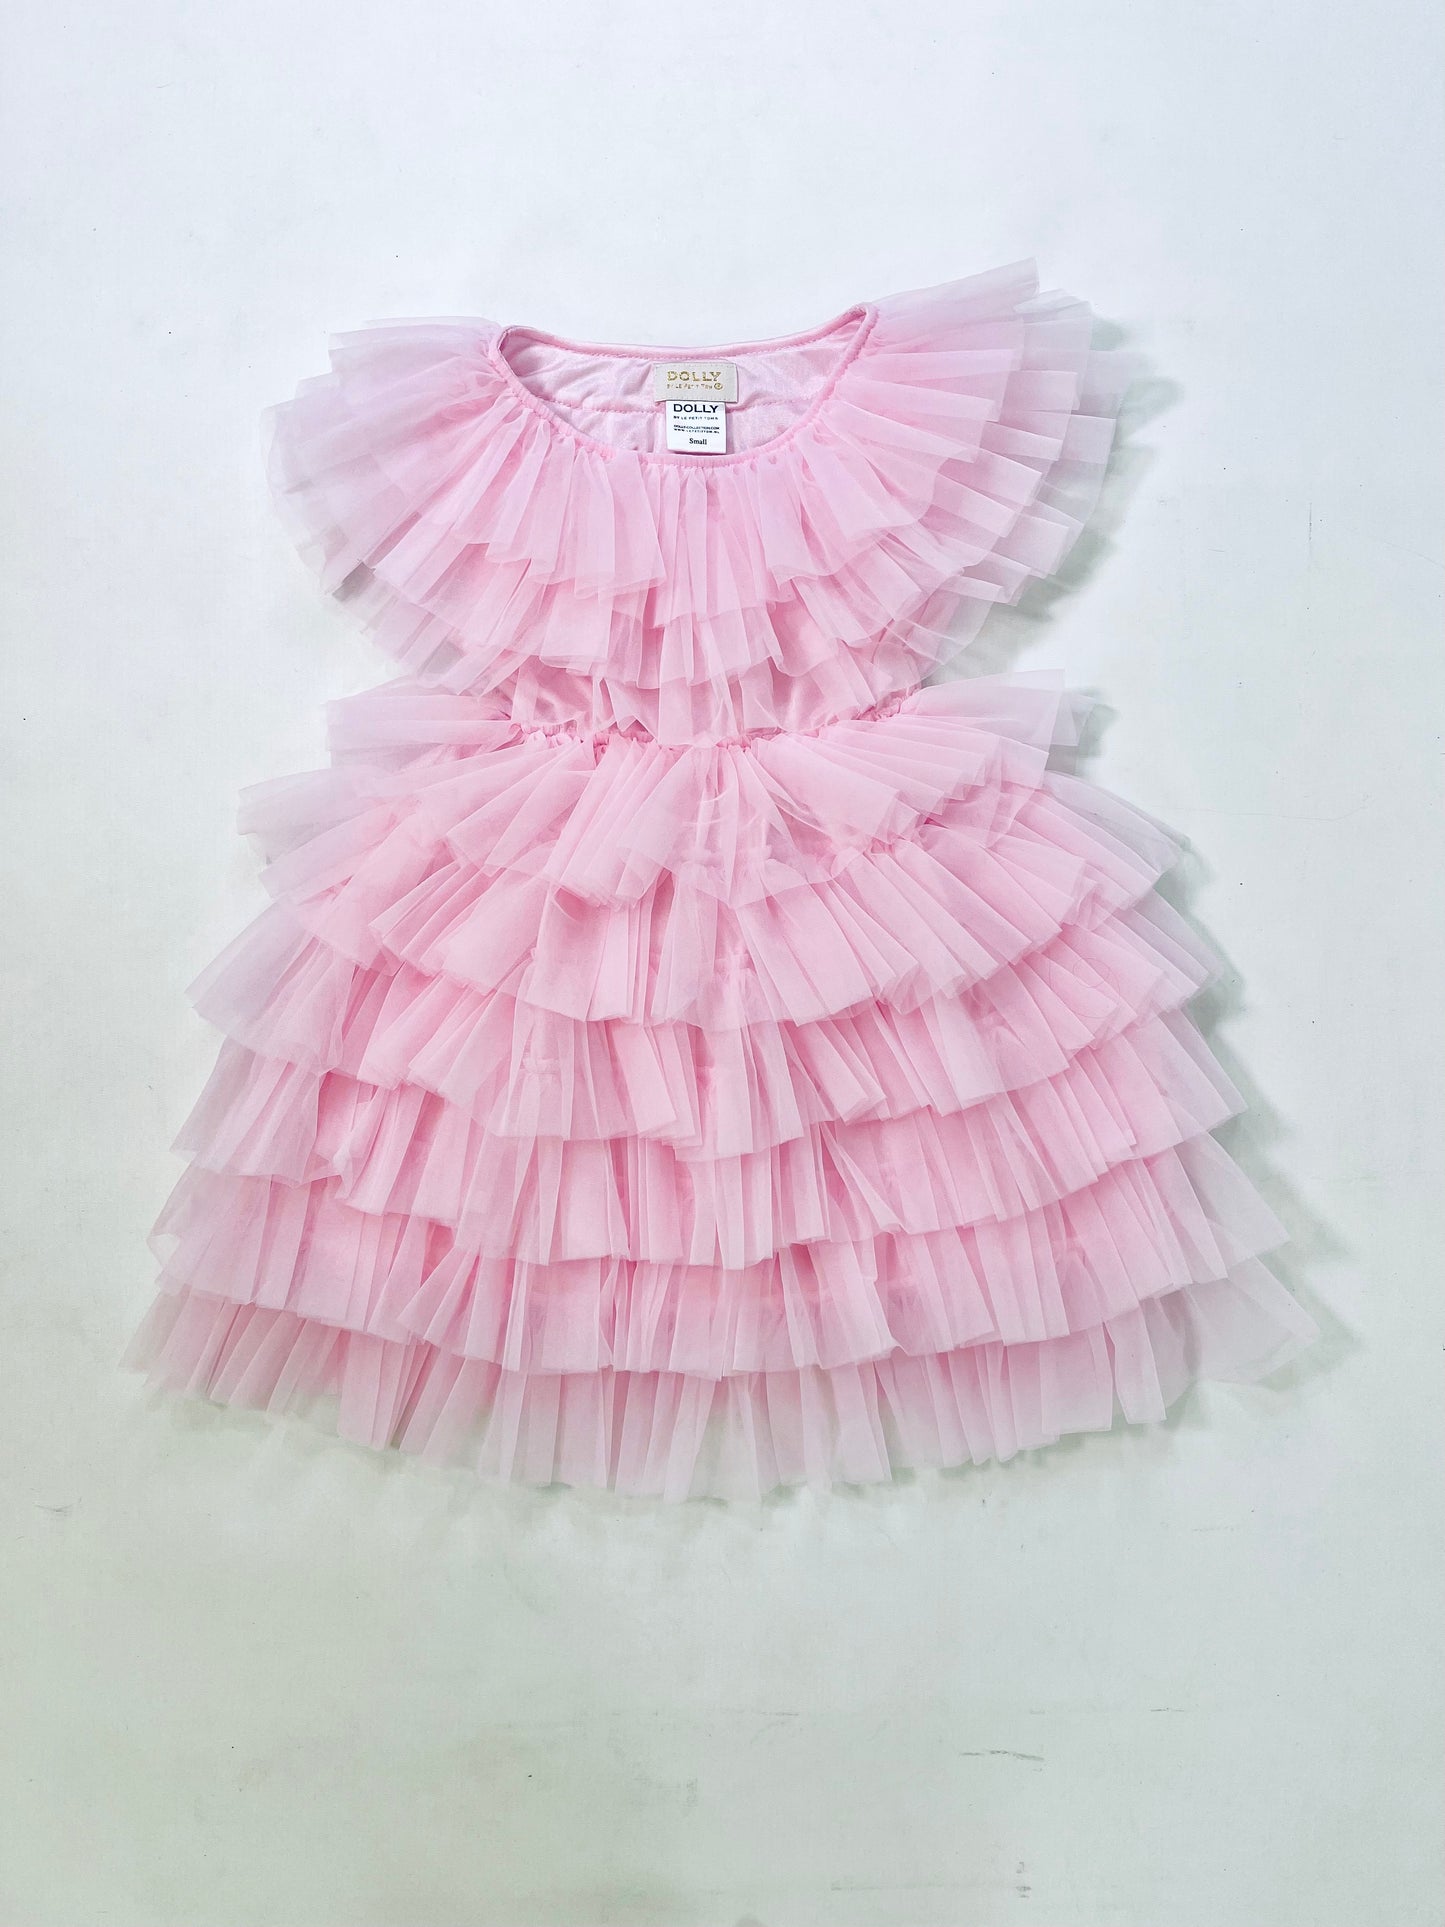 DOLLY DELICIOUS CAKE DRESS strawberry